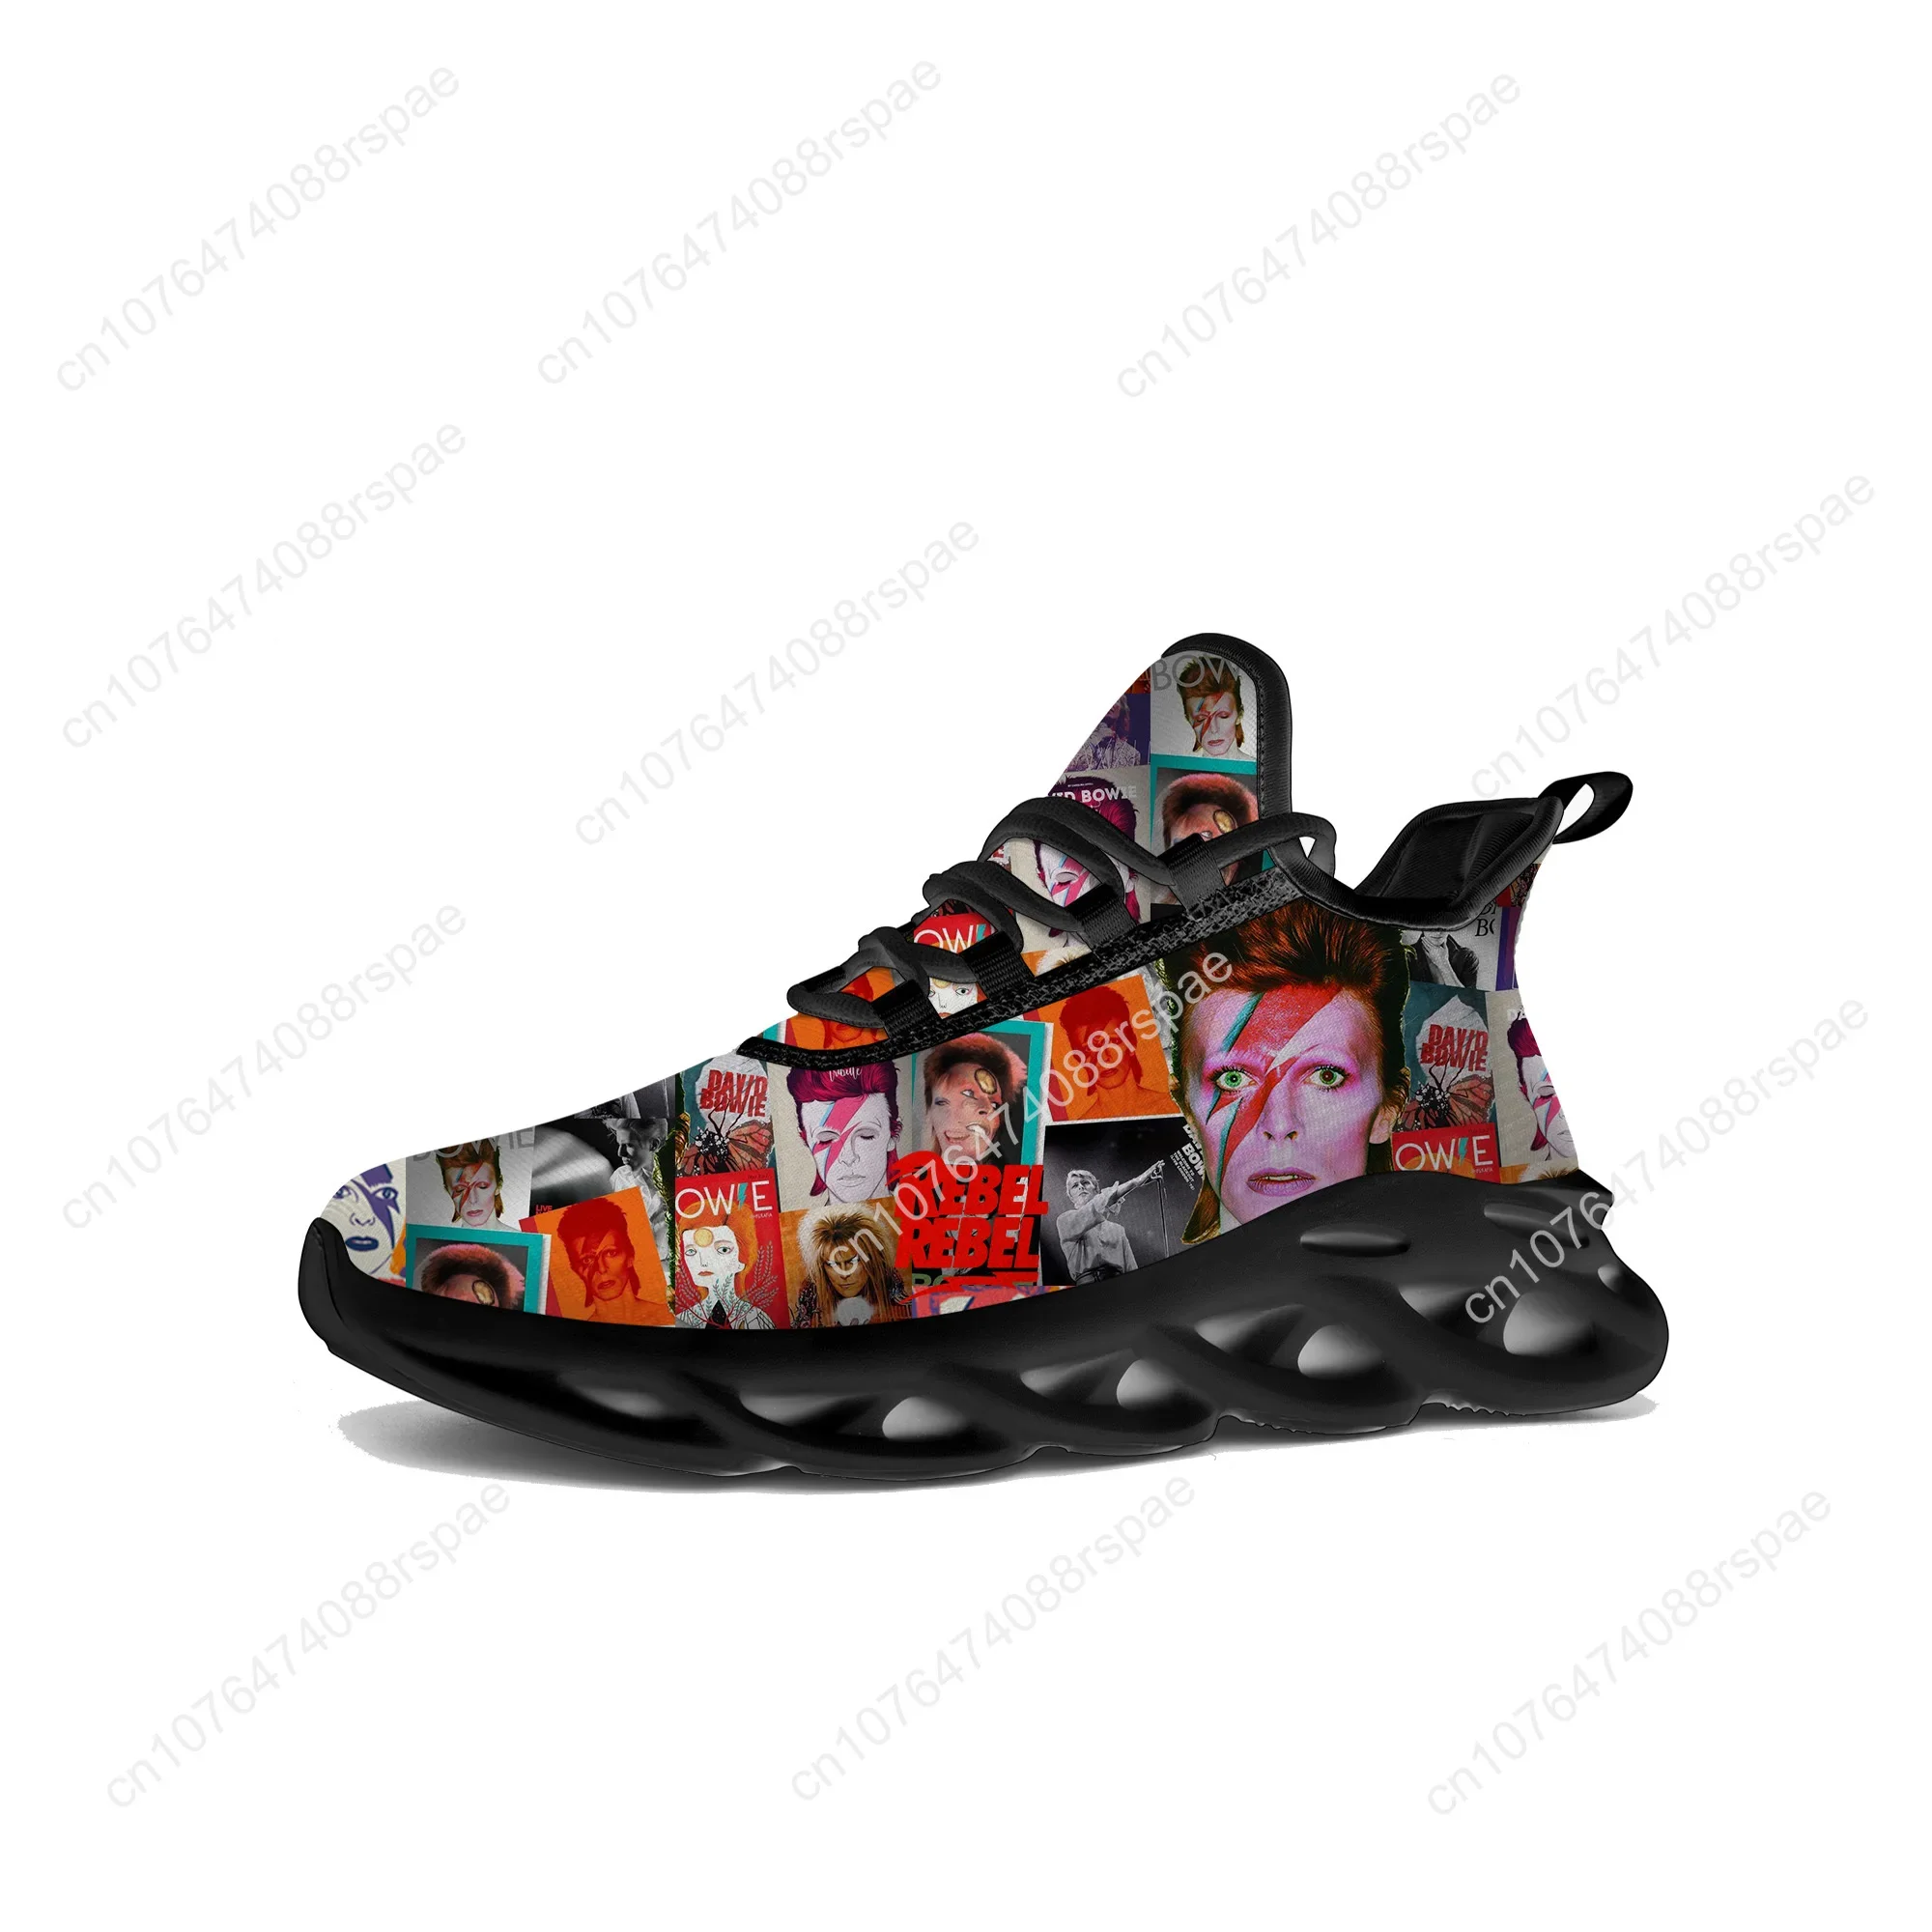 

David Rock Star Singer Flats Sneakers Mens Womens High Quality Sports Running Shoes Bowie Sneaker Customized Made Shoe